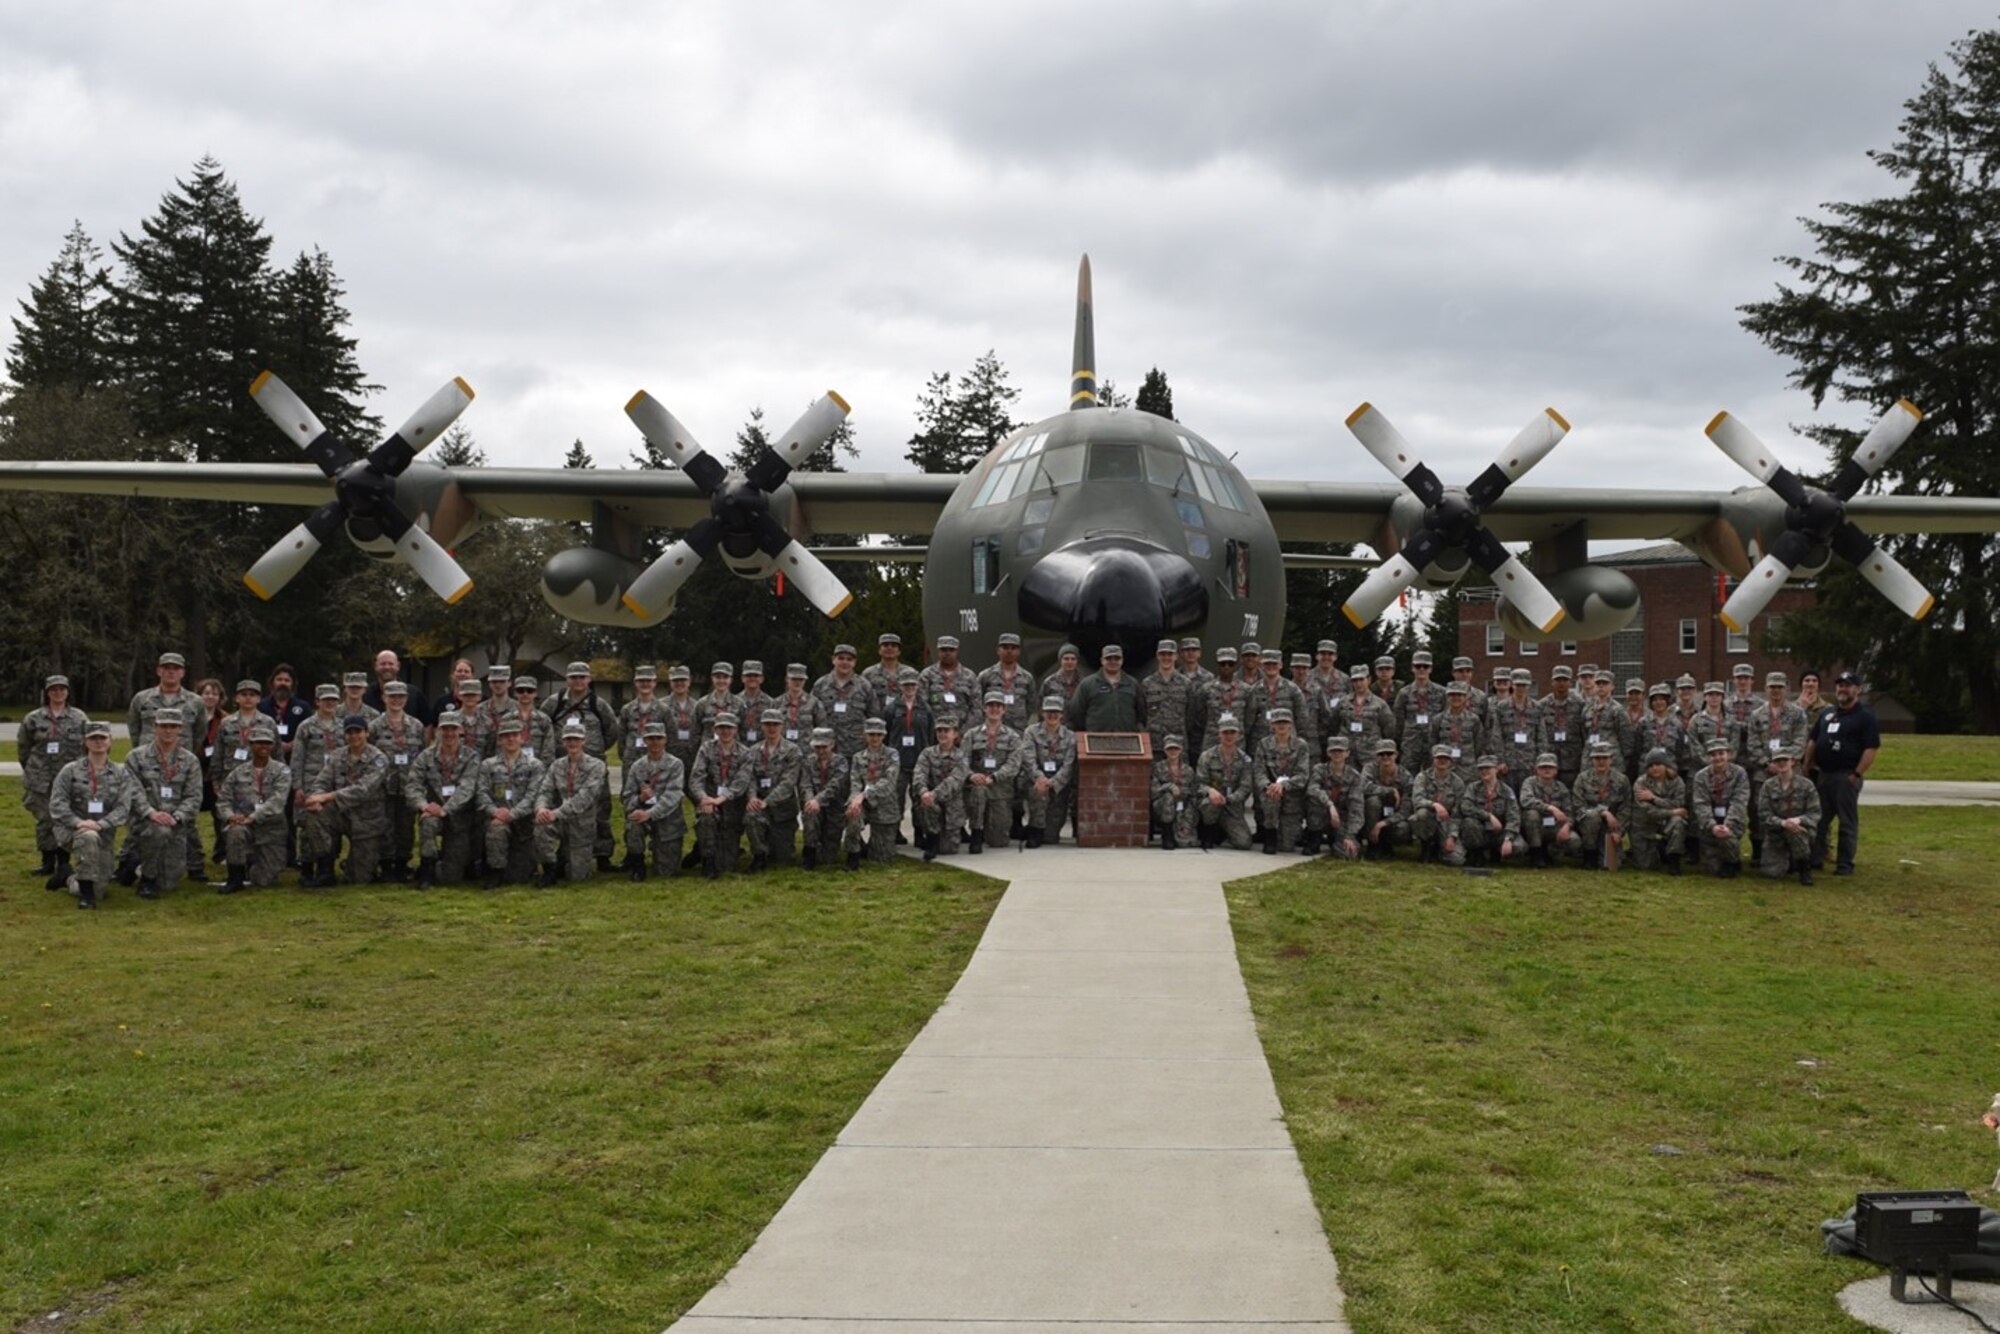 Washington Civil Air Patrol cadets pose for a photo at the Heritage Hill airpark April 22, 2023 at Joint Base Lewis-McChord, Washington. The CAP cadets visited McChord on an installation tour and took part in an incentive flight. The Cadet Programs target youth aged 12-20 and educate them in leadership, aerospace, fitness and character development. (U.S. Air Force photo by Tech. Sgt. Benjamin Sutton)